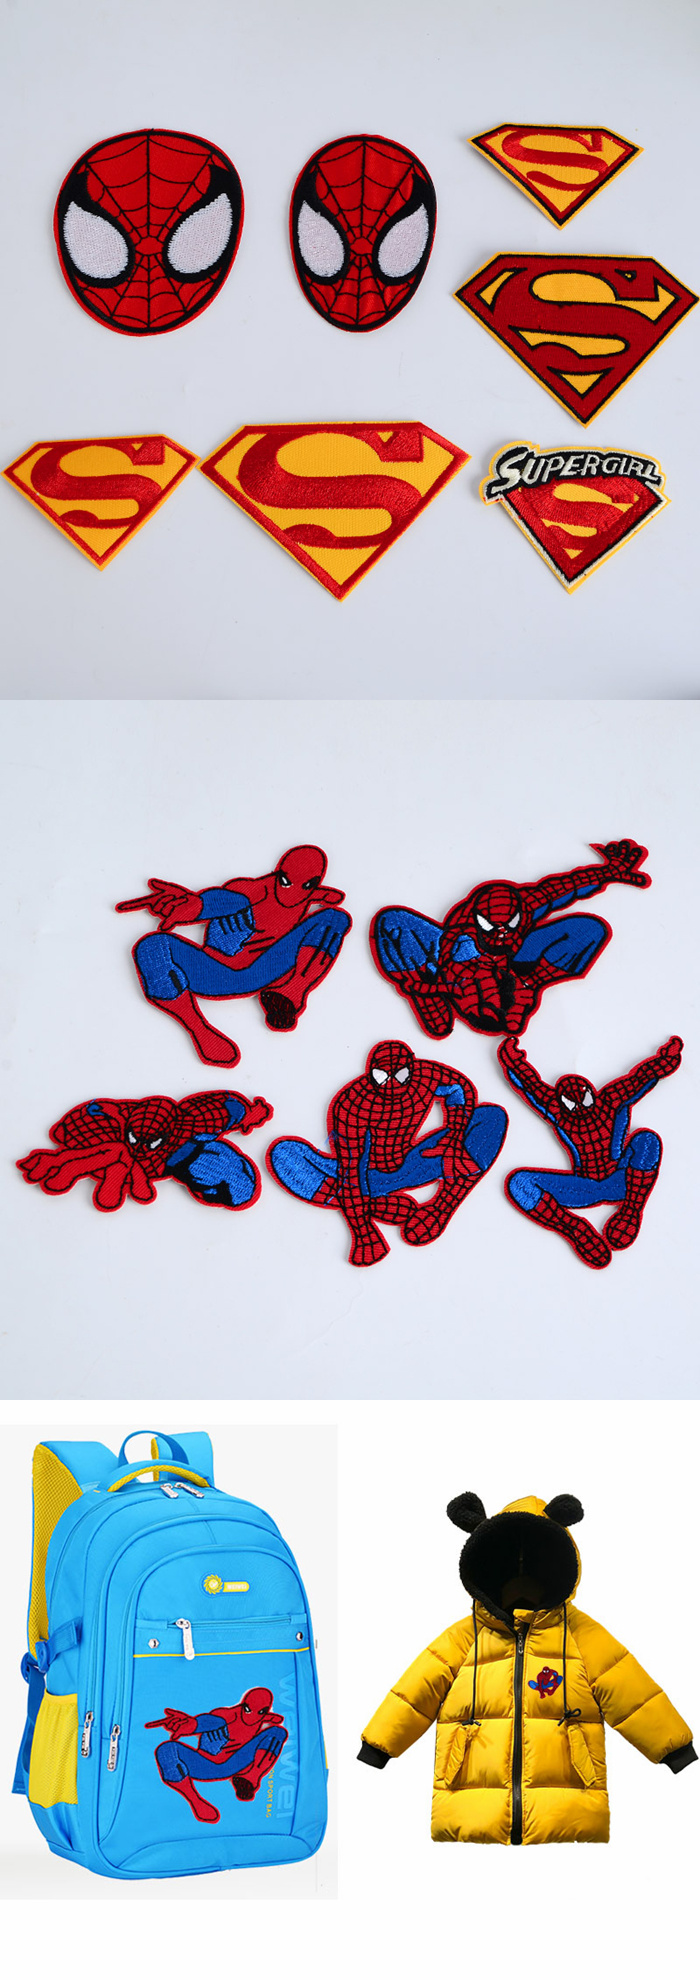 Spiderman Embroidery Patch for Children's Clothing, Hats, Backpacks, etc.